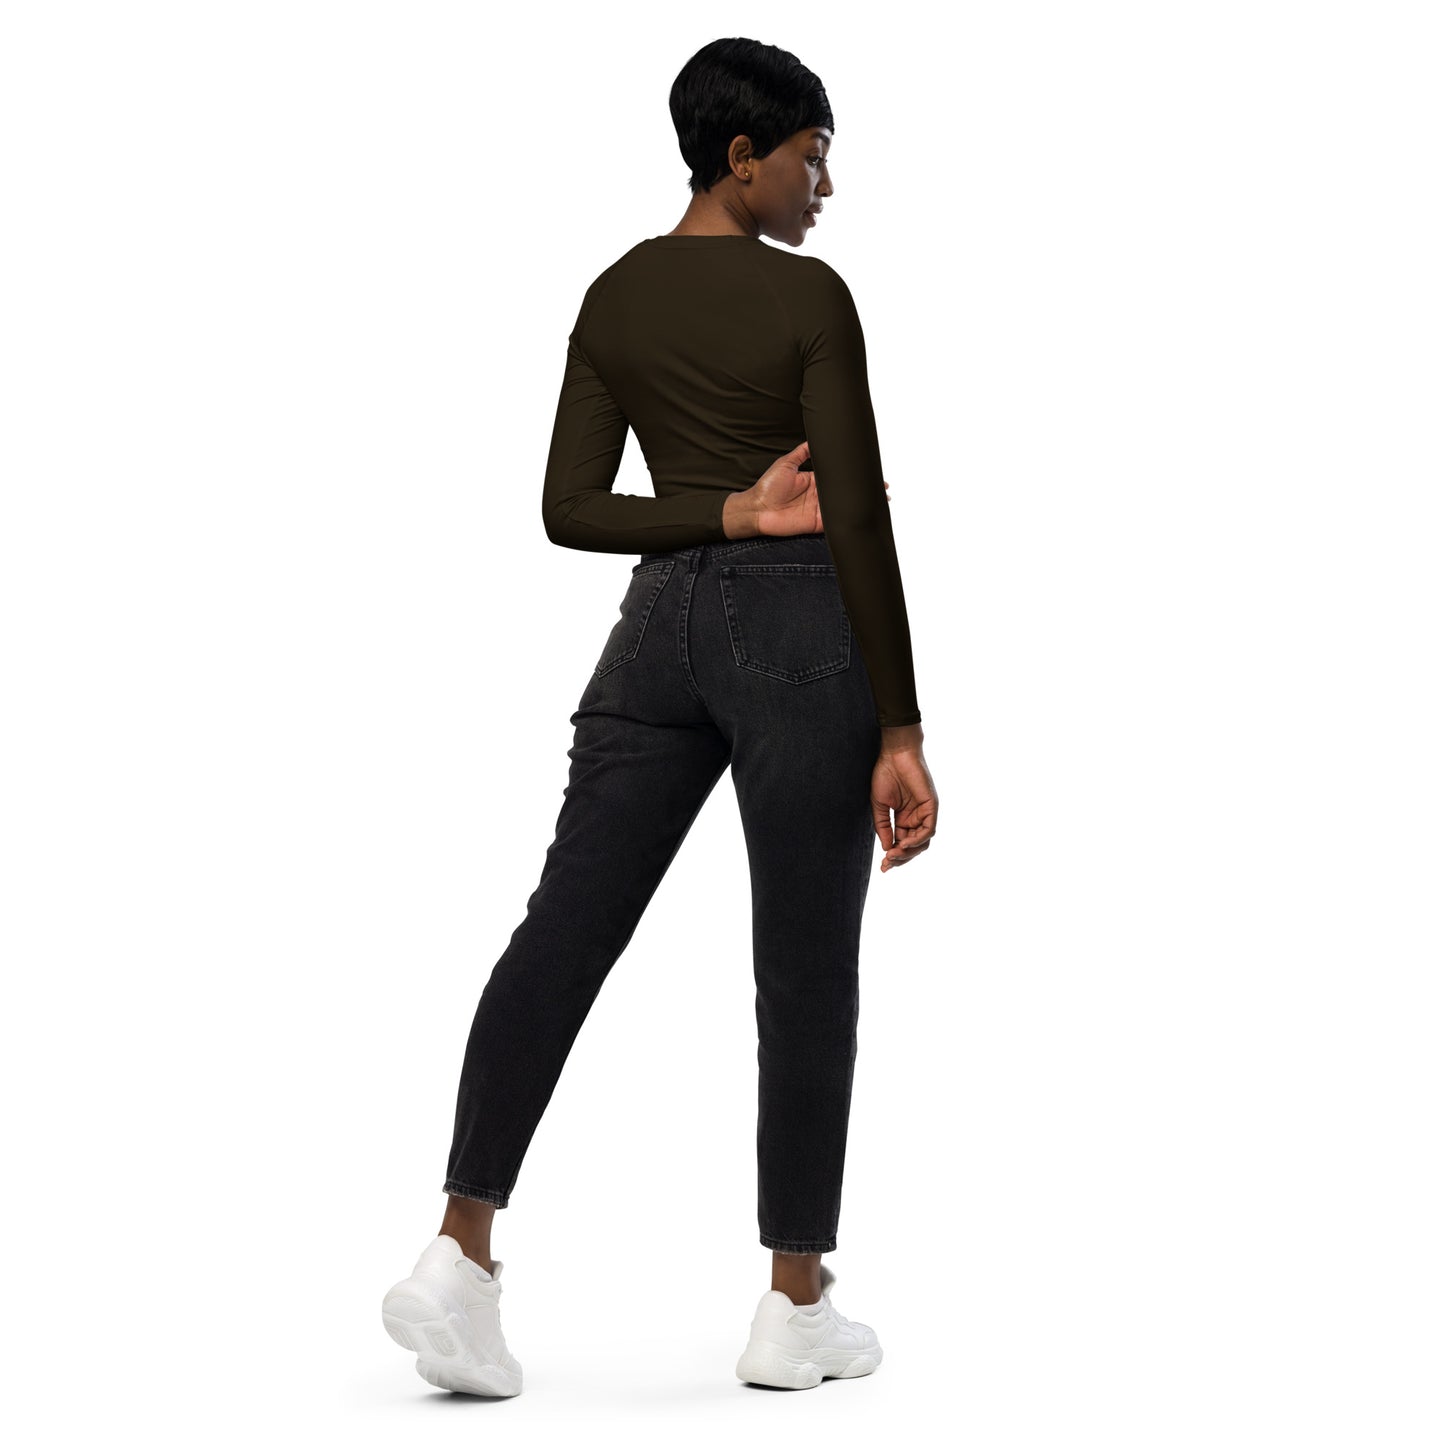 THE ESSENTIAL LONG SLEEVE FITTED CROP TOP ESPRESSO